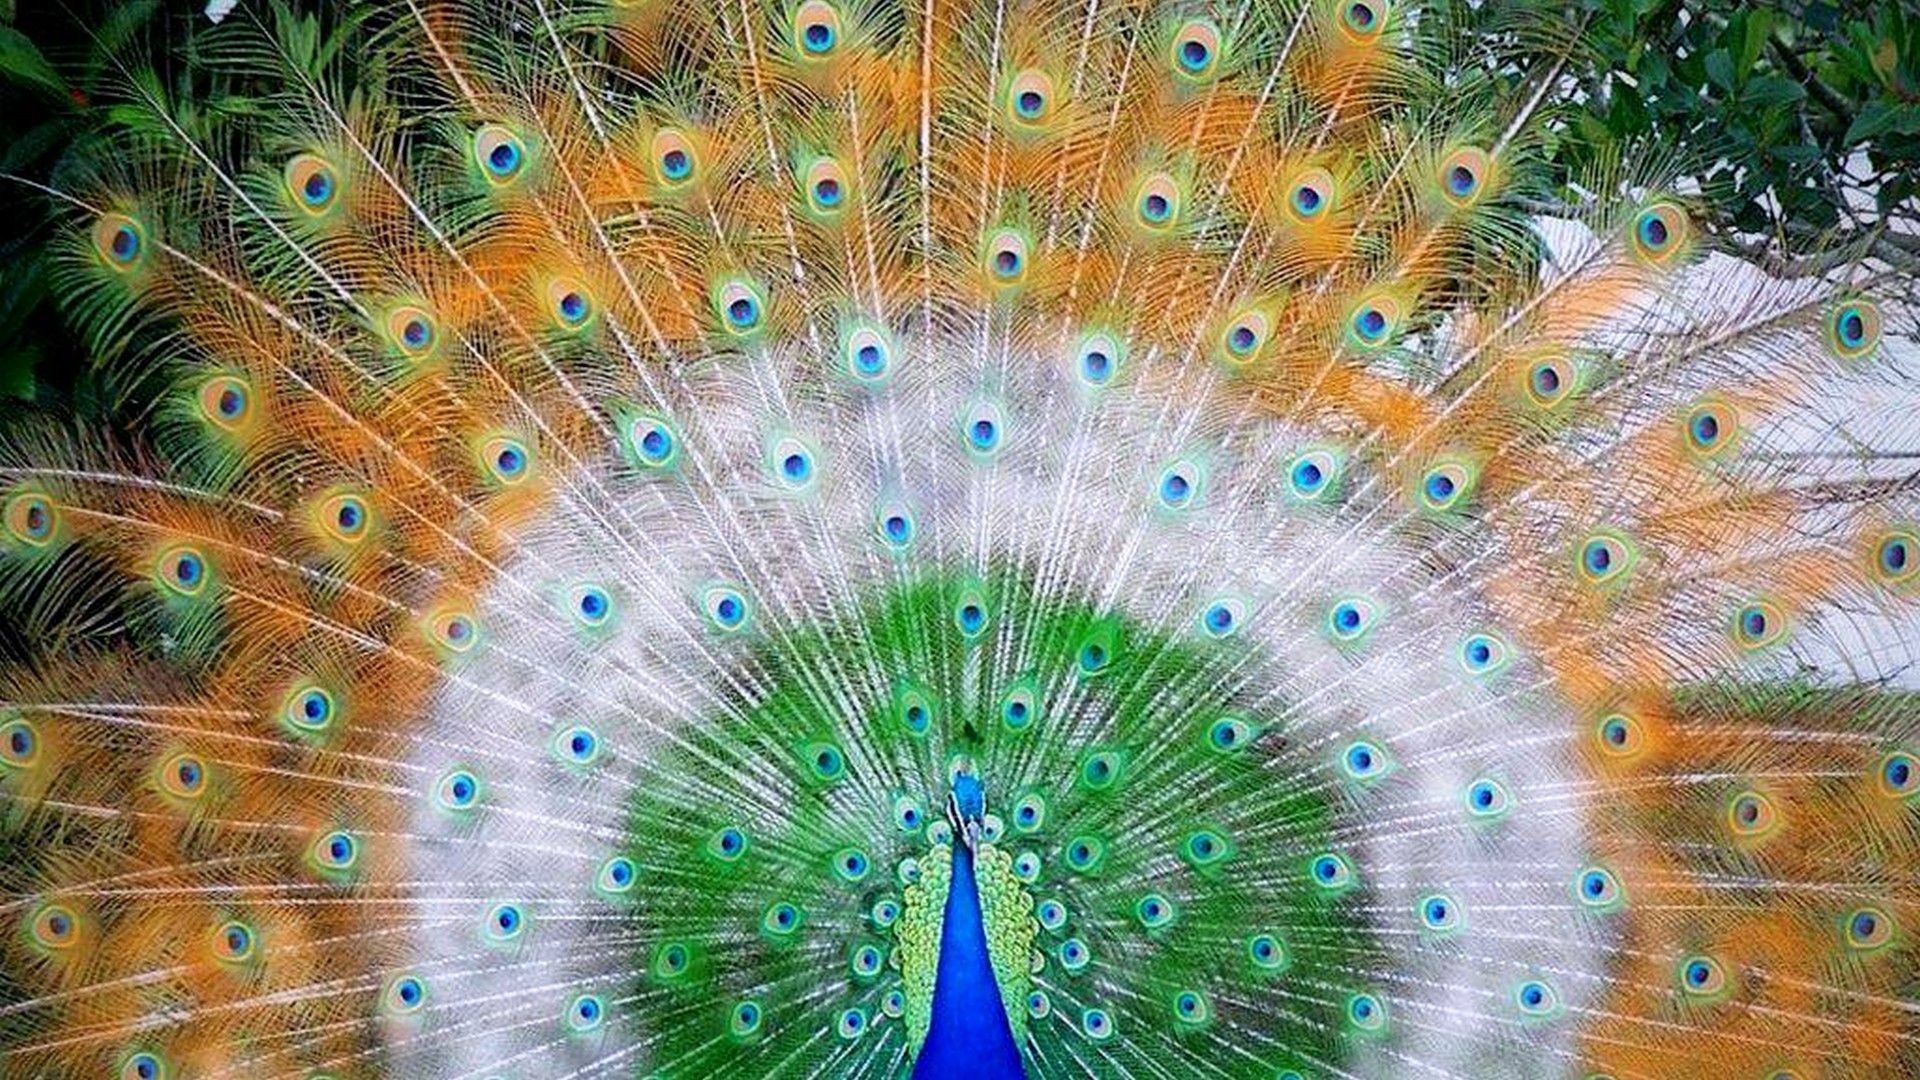 pictures of peacocks